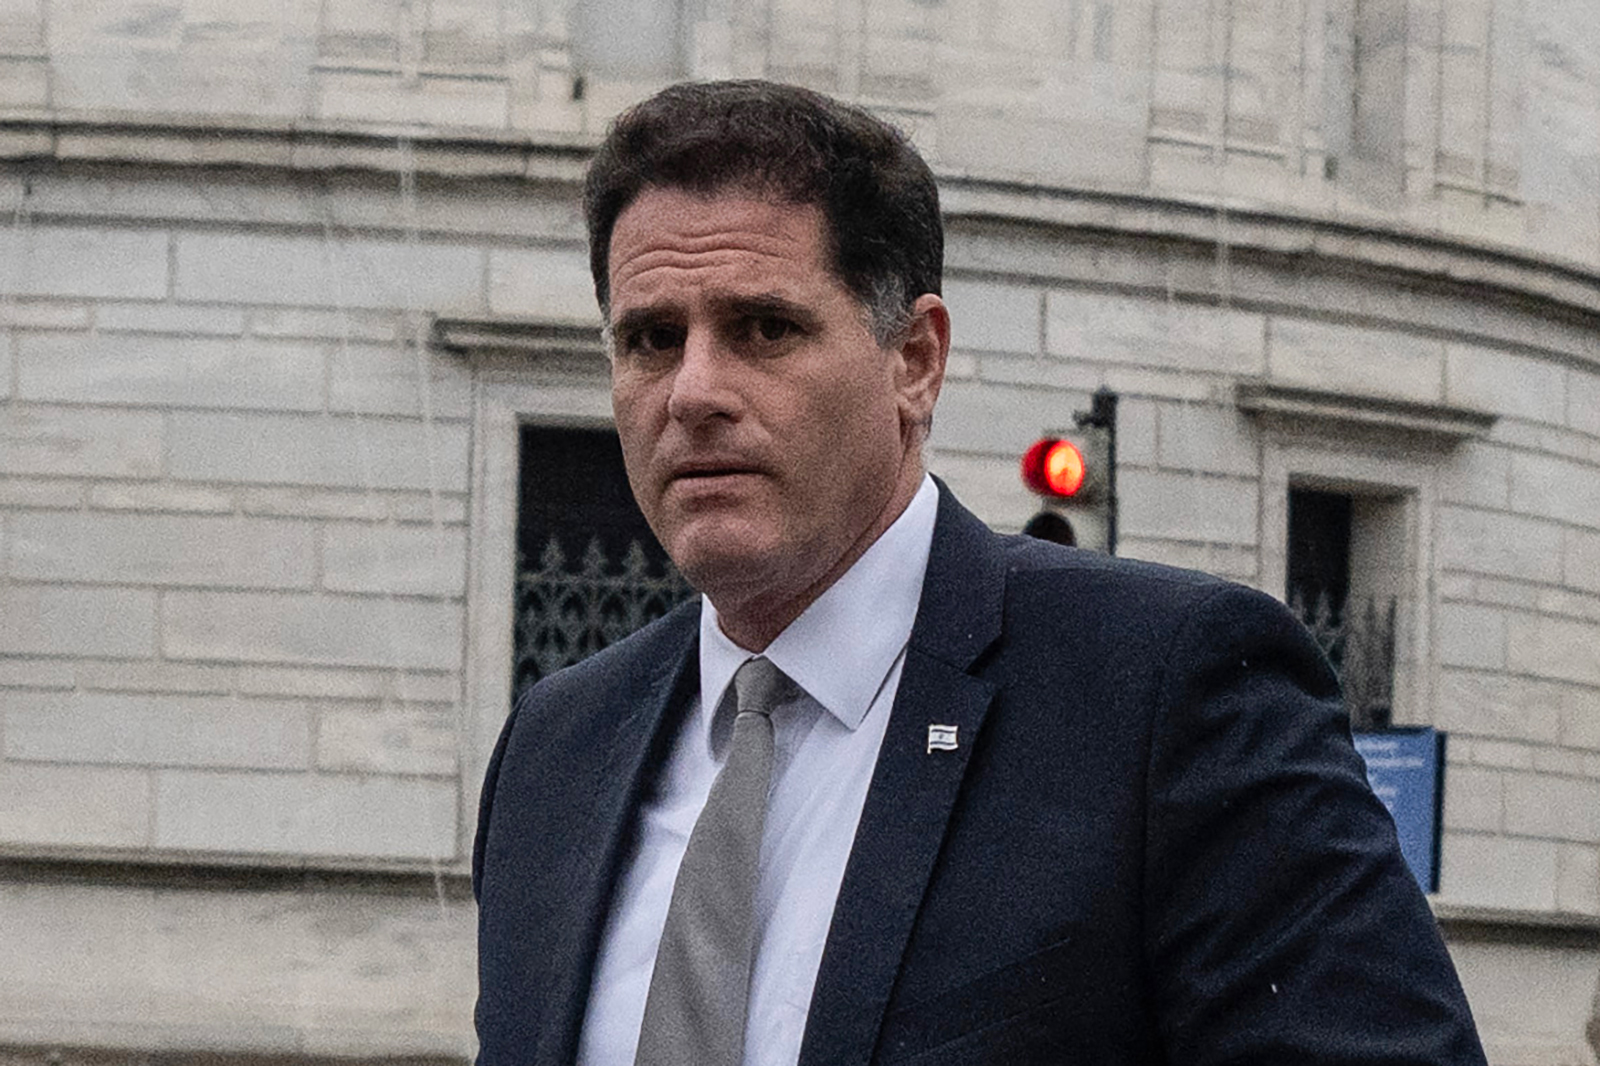 Ron Dermer walks into the Executive Office Building in Washington, DC on December 26.